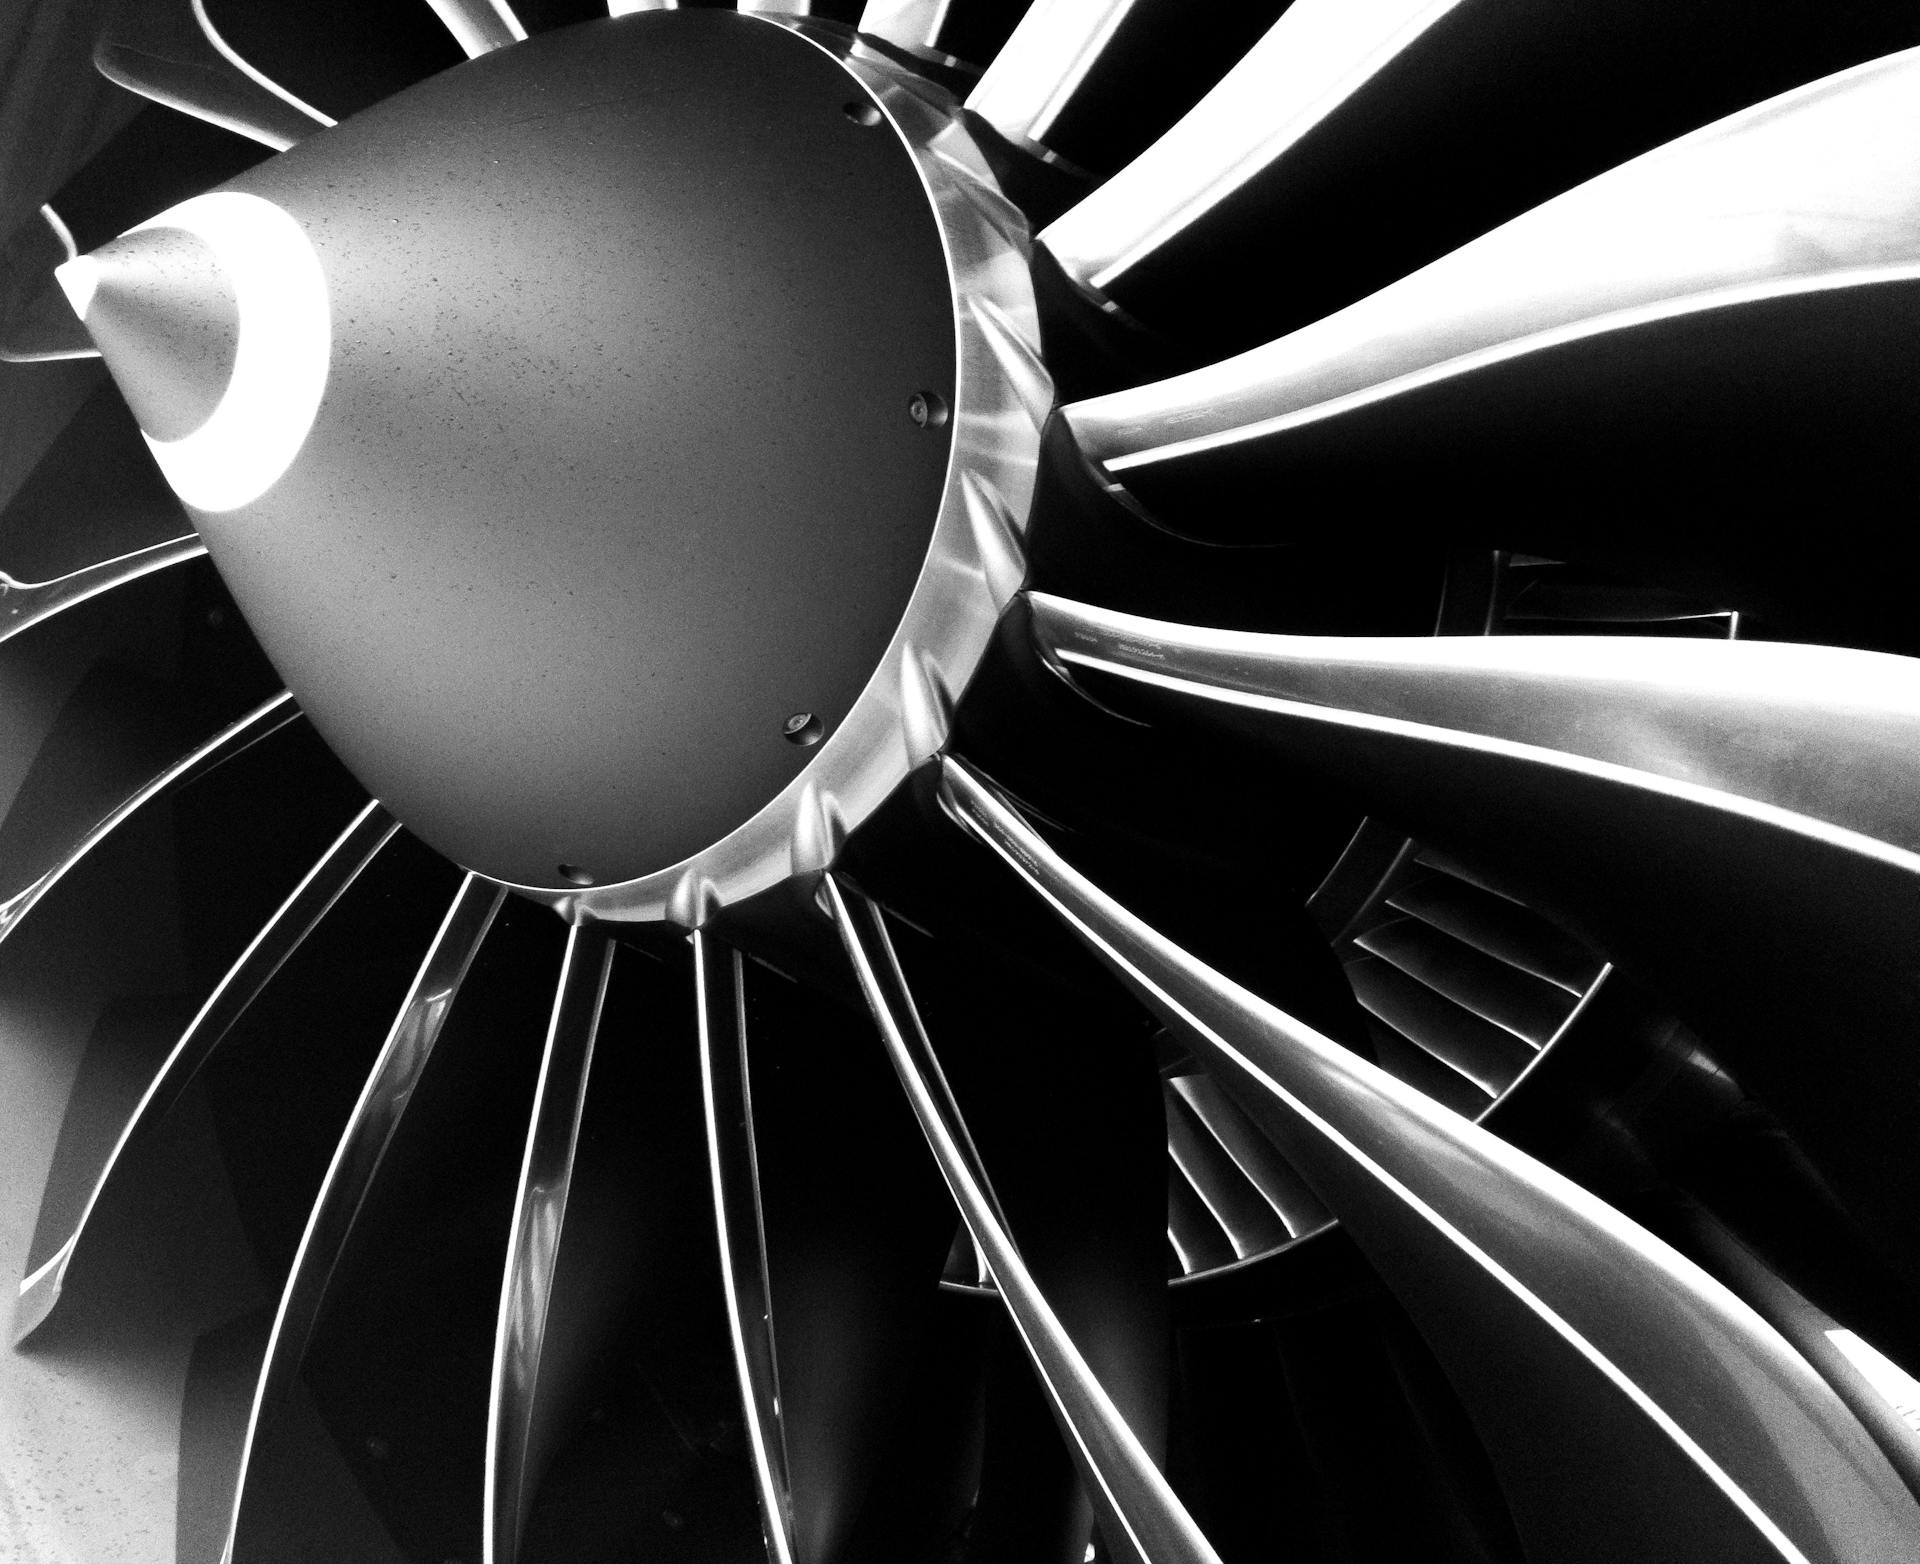 Close up black and white image of a plane's metallic engine blades